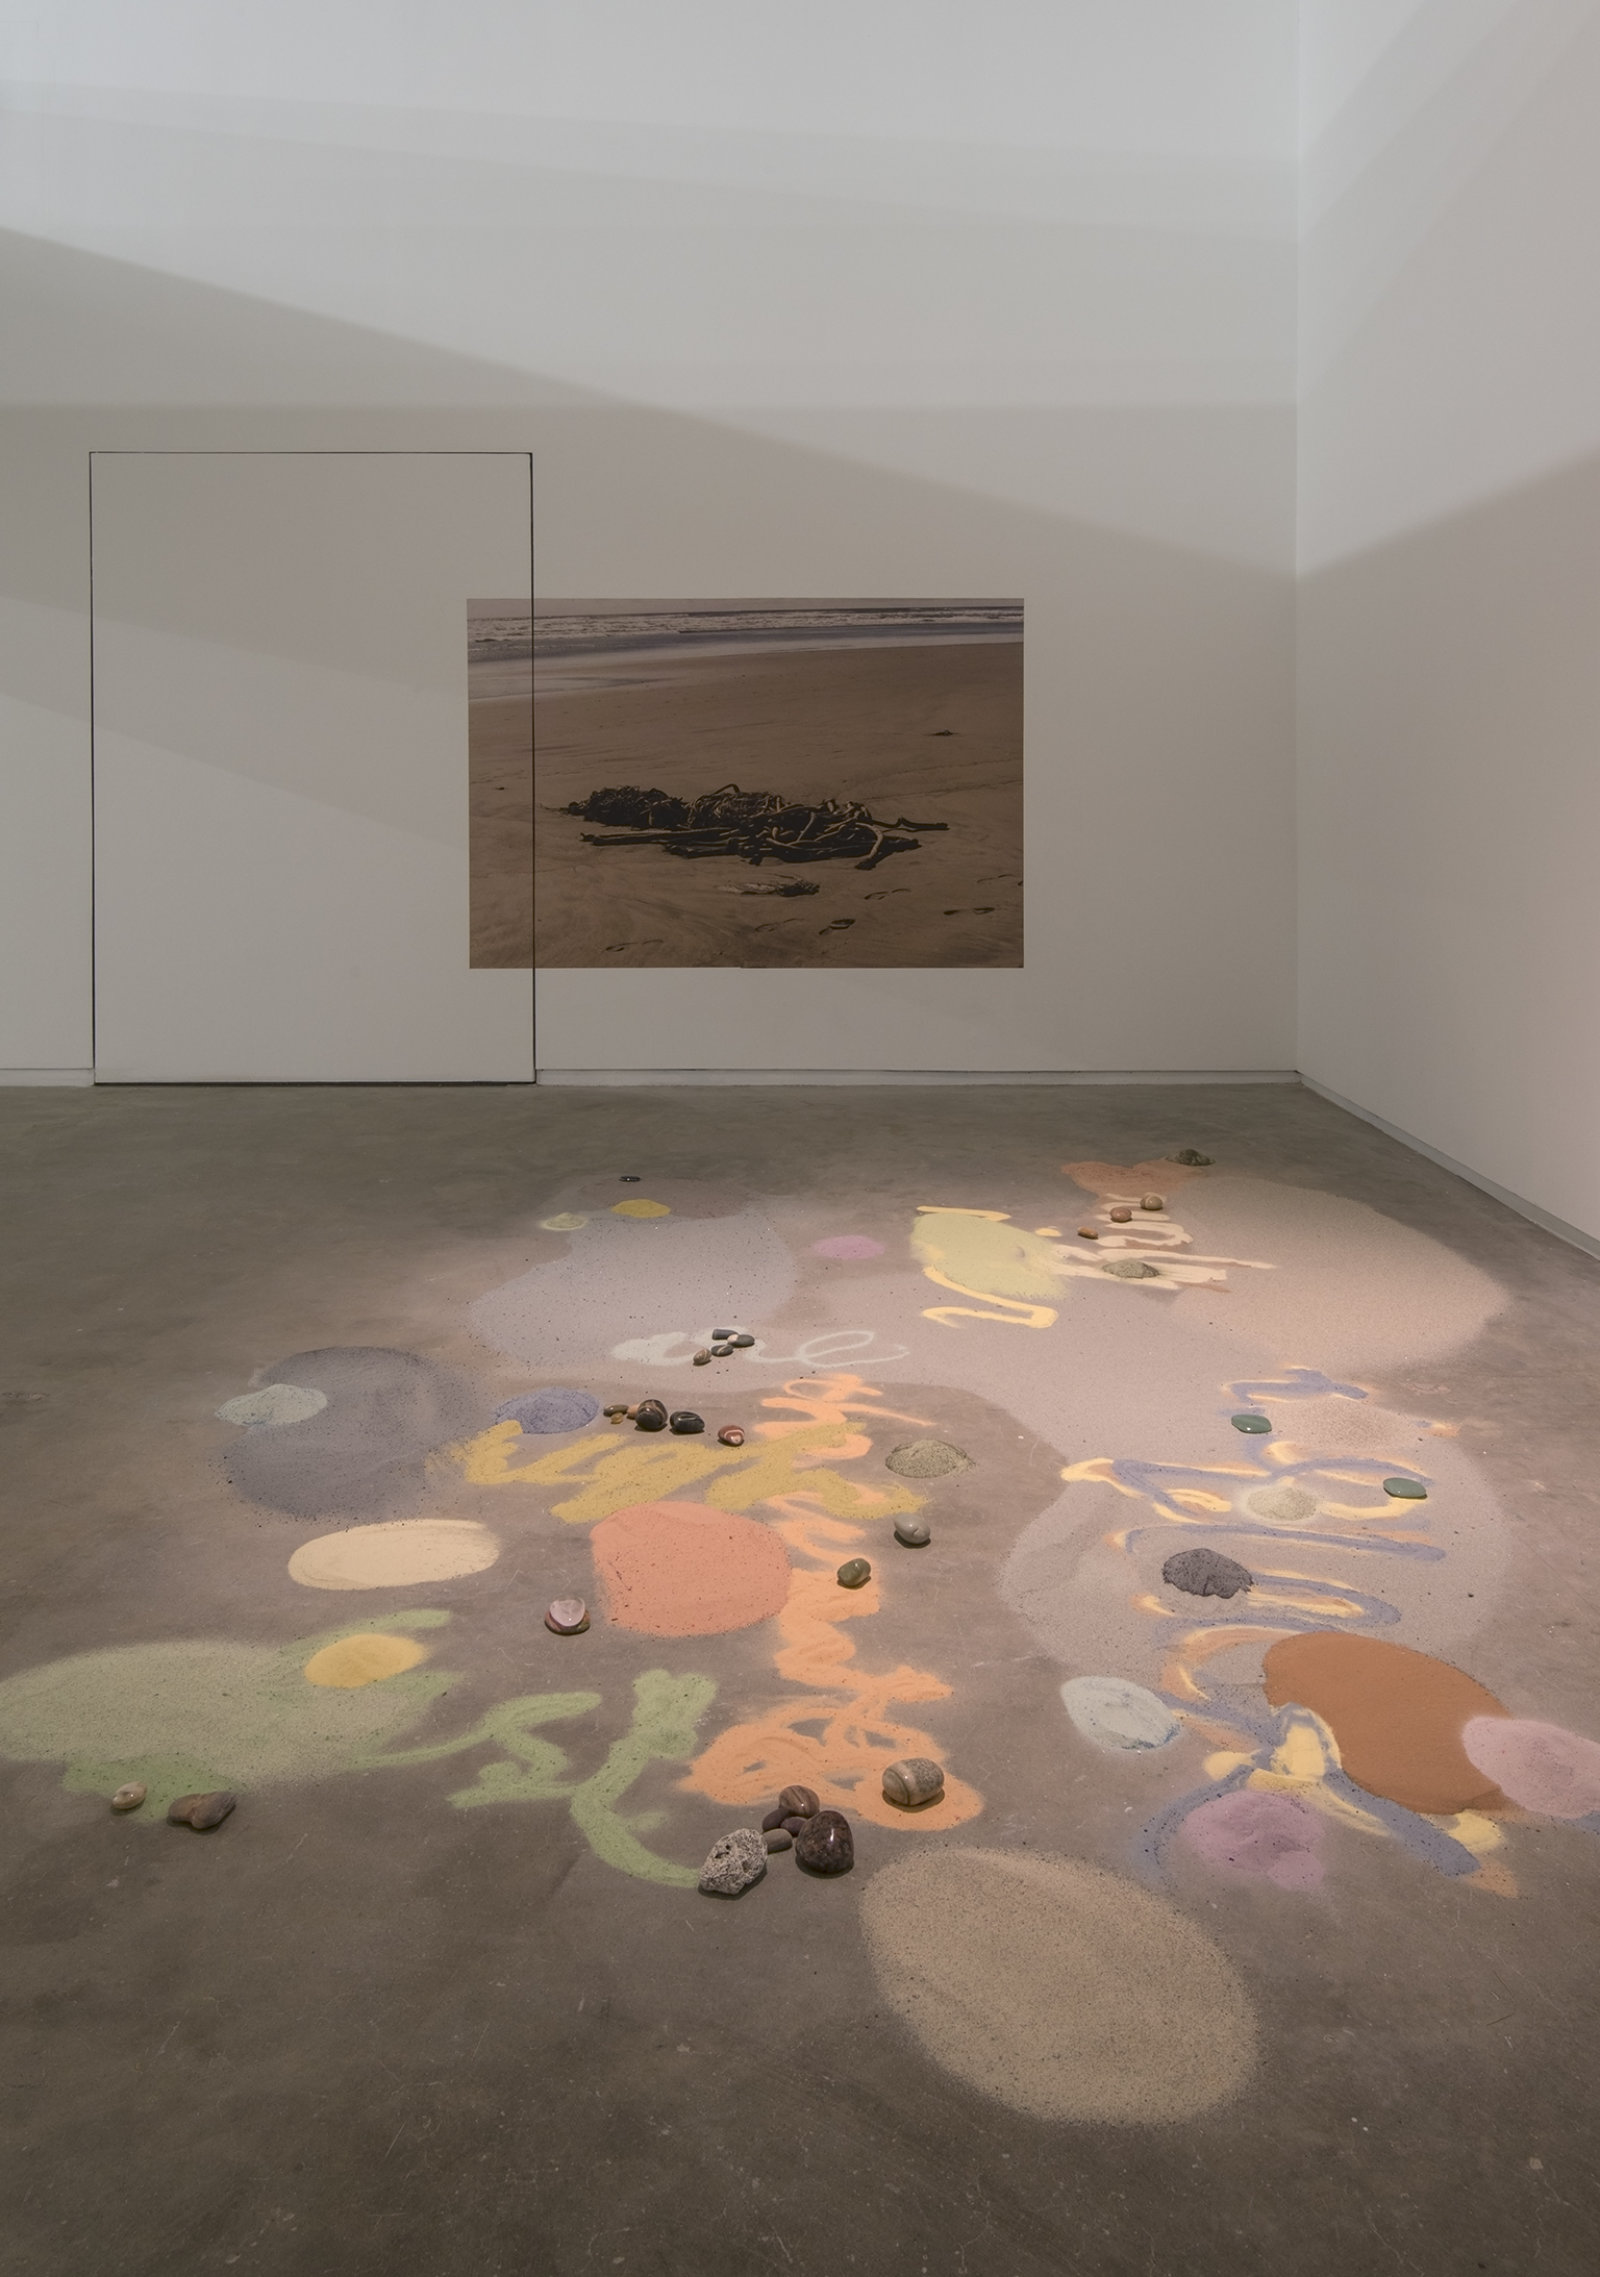 Christina Mackie, Interzonal, 2002–2012, Nightlight, DVD, filmed by Quentin Mackie, sand, pigments, beach stones polished by Gillian Mackie, inkjet print, fir, steel cloth, plastic, ceramics (George and Christina Mackie), Forestface, DVD projection, fluorescent lamps, dimensions variable